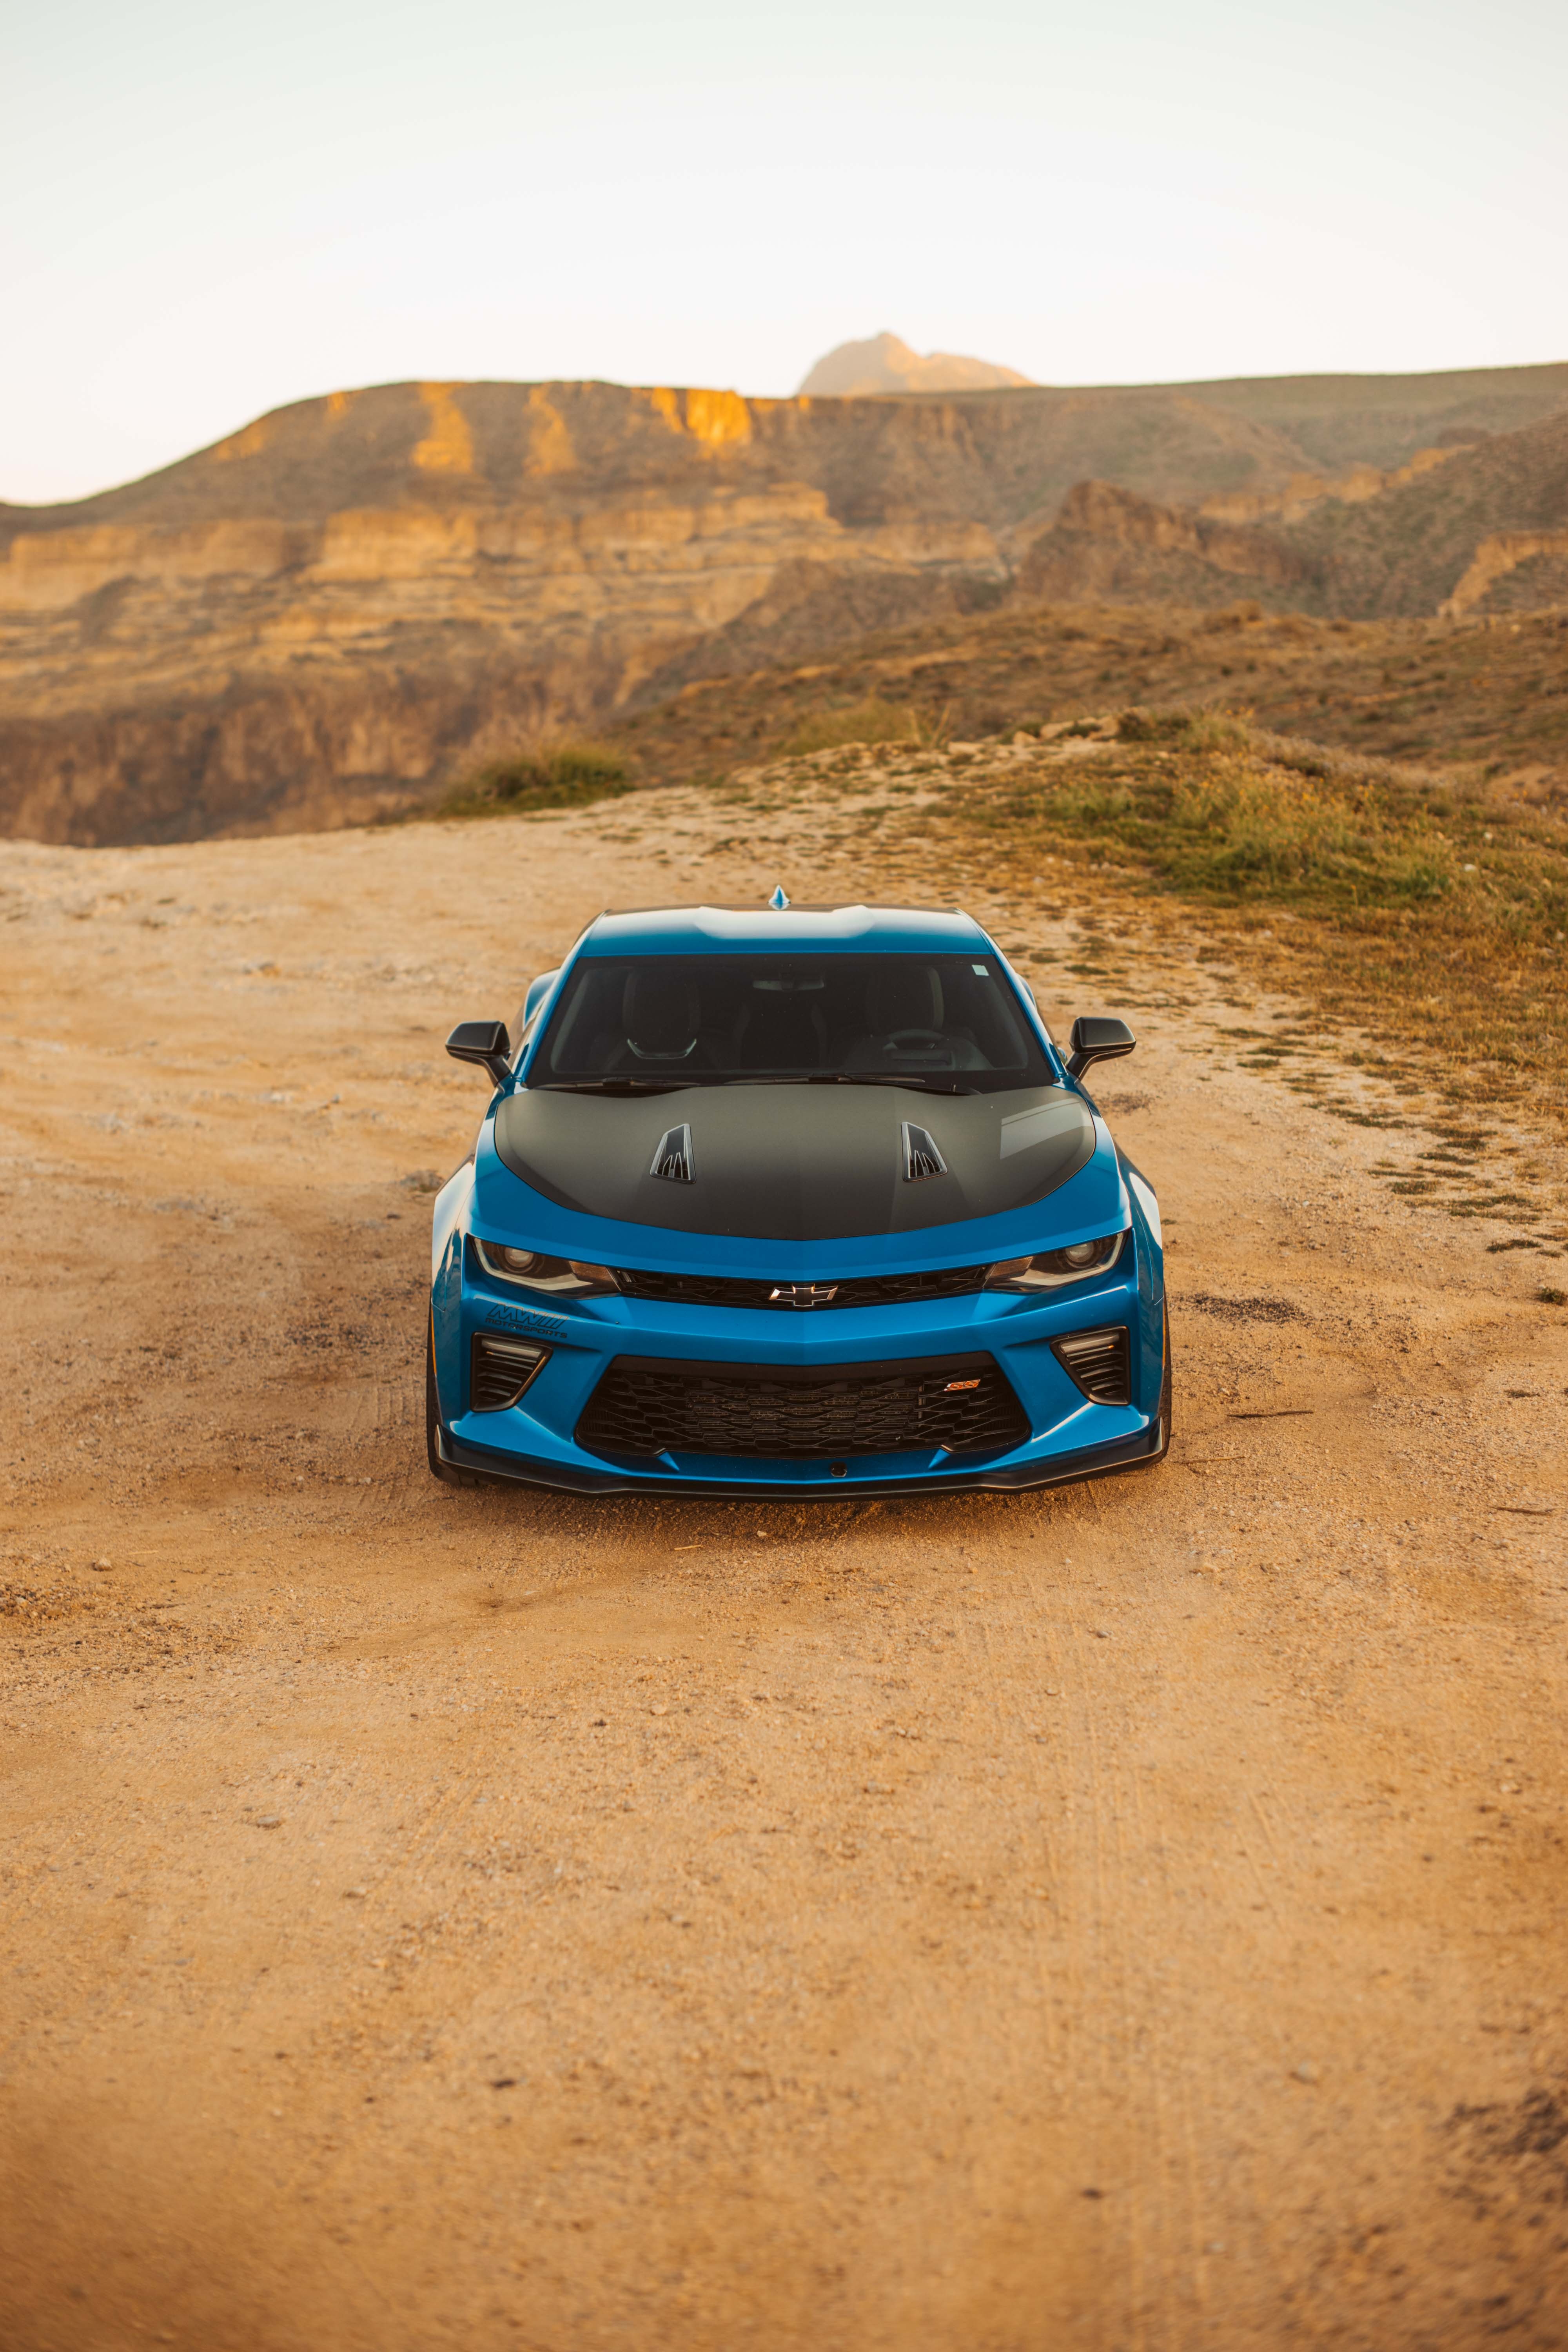 chevrolet, tuning, front view, cars, car mobile wallpaper